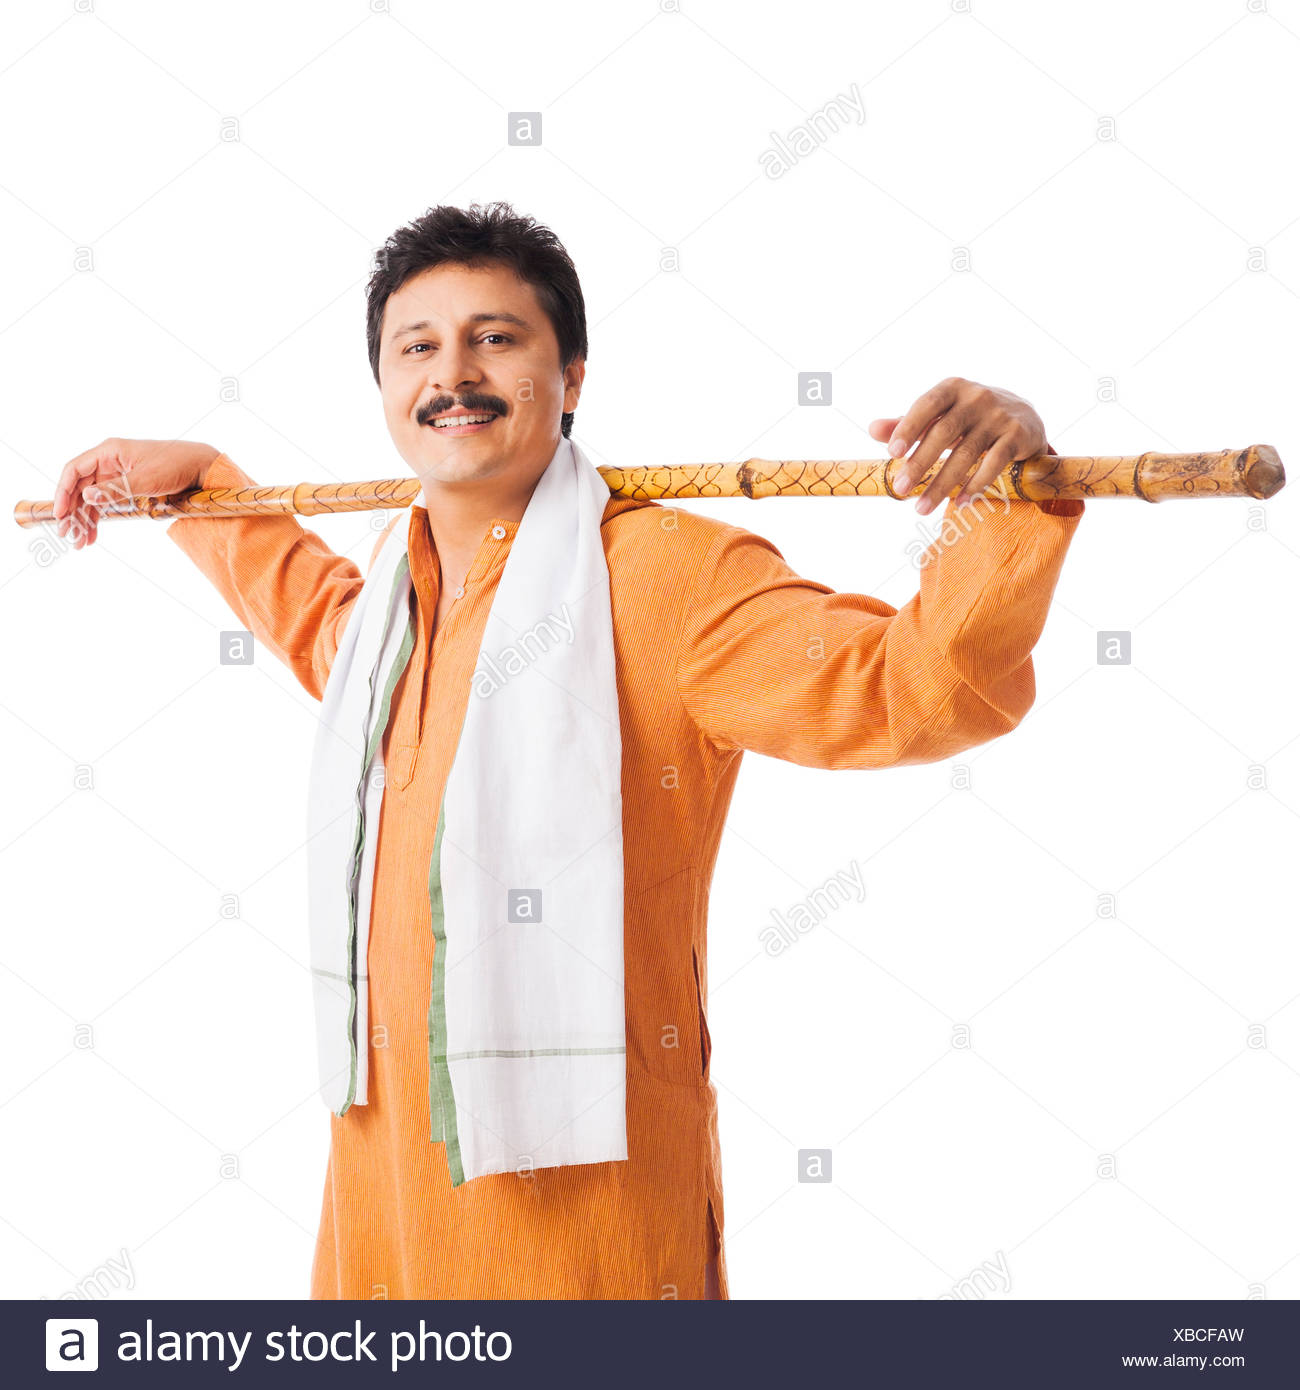 portrait-of-a-man-with-wooden-staff-on-his-shoulders-XBCFAW.jpg